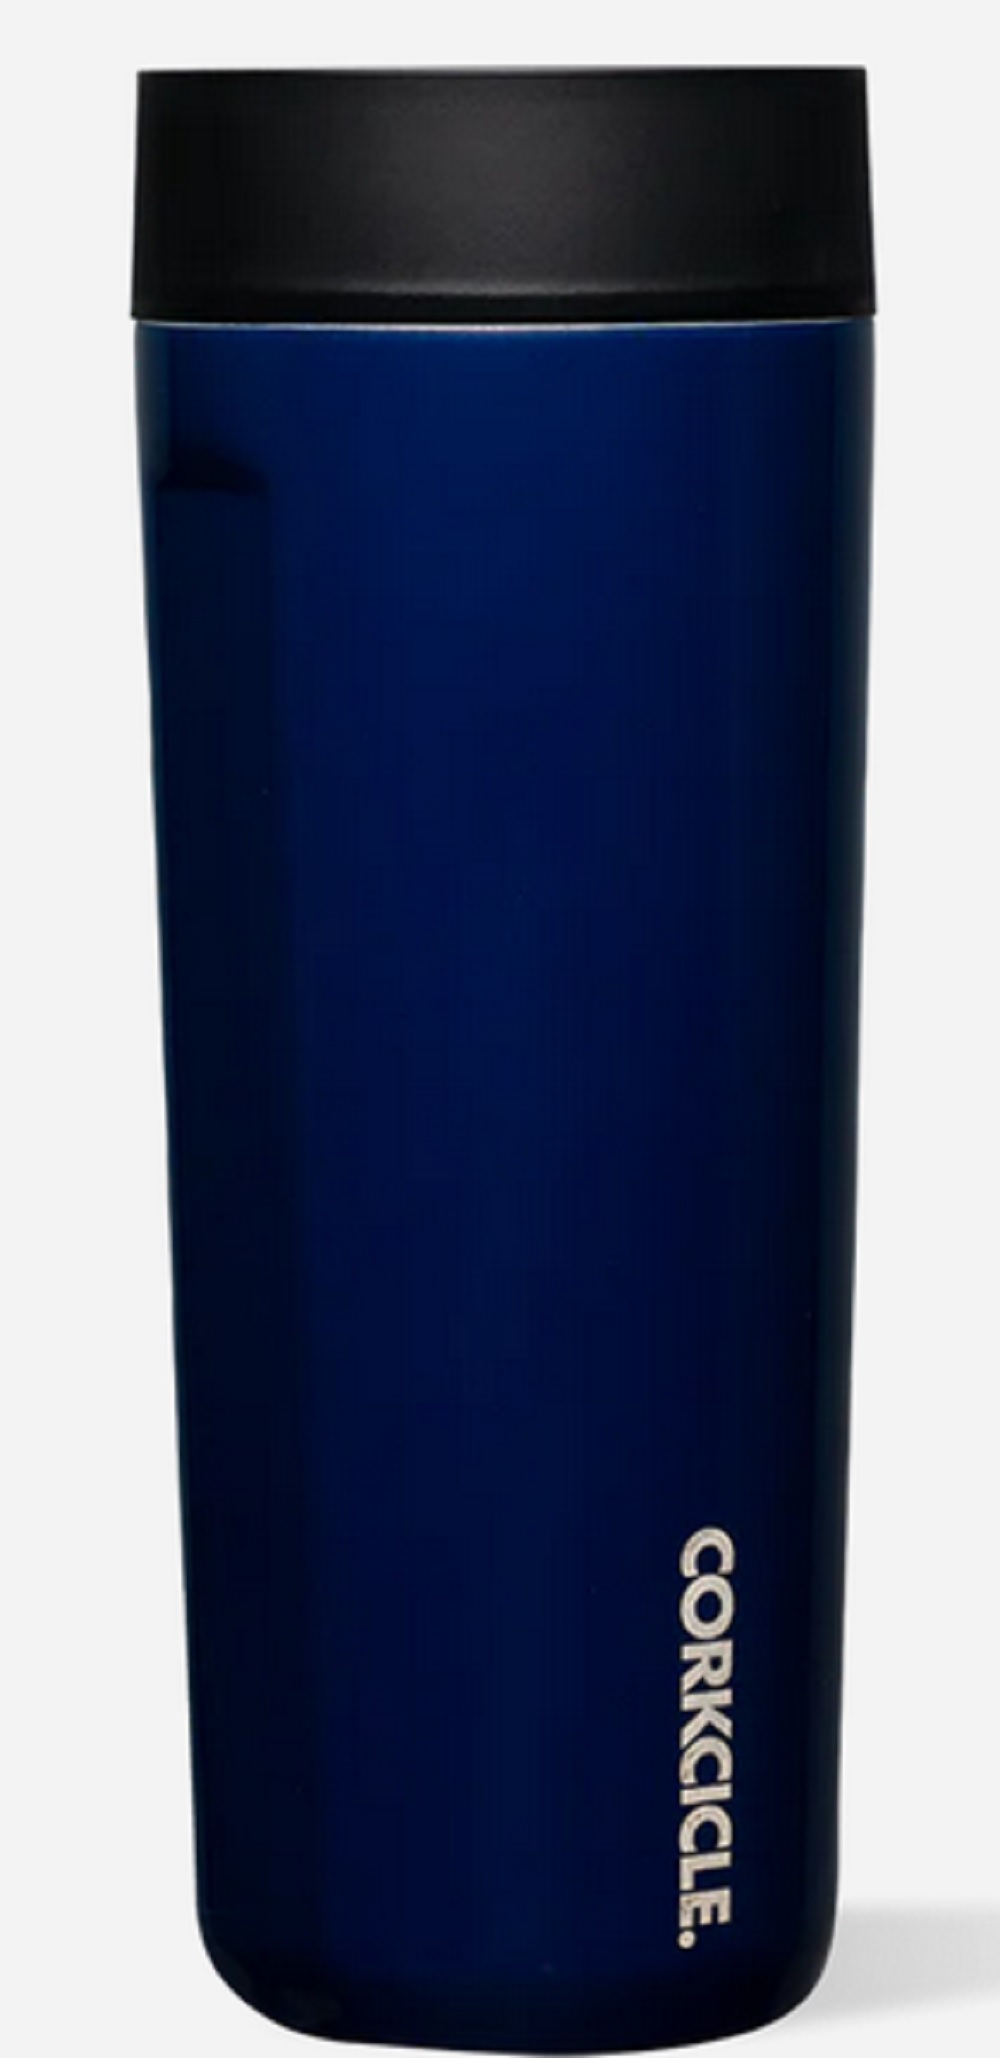 Corkcicle 17oz. Gloss Midnight Navy Commuter Spill-proof Insulated Travel Coffee Mug